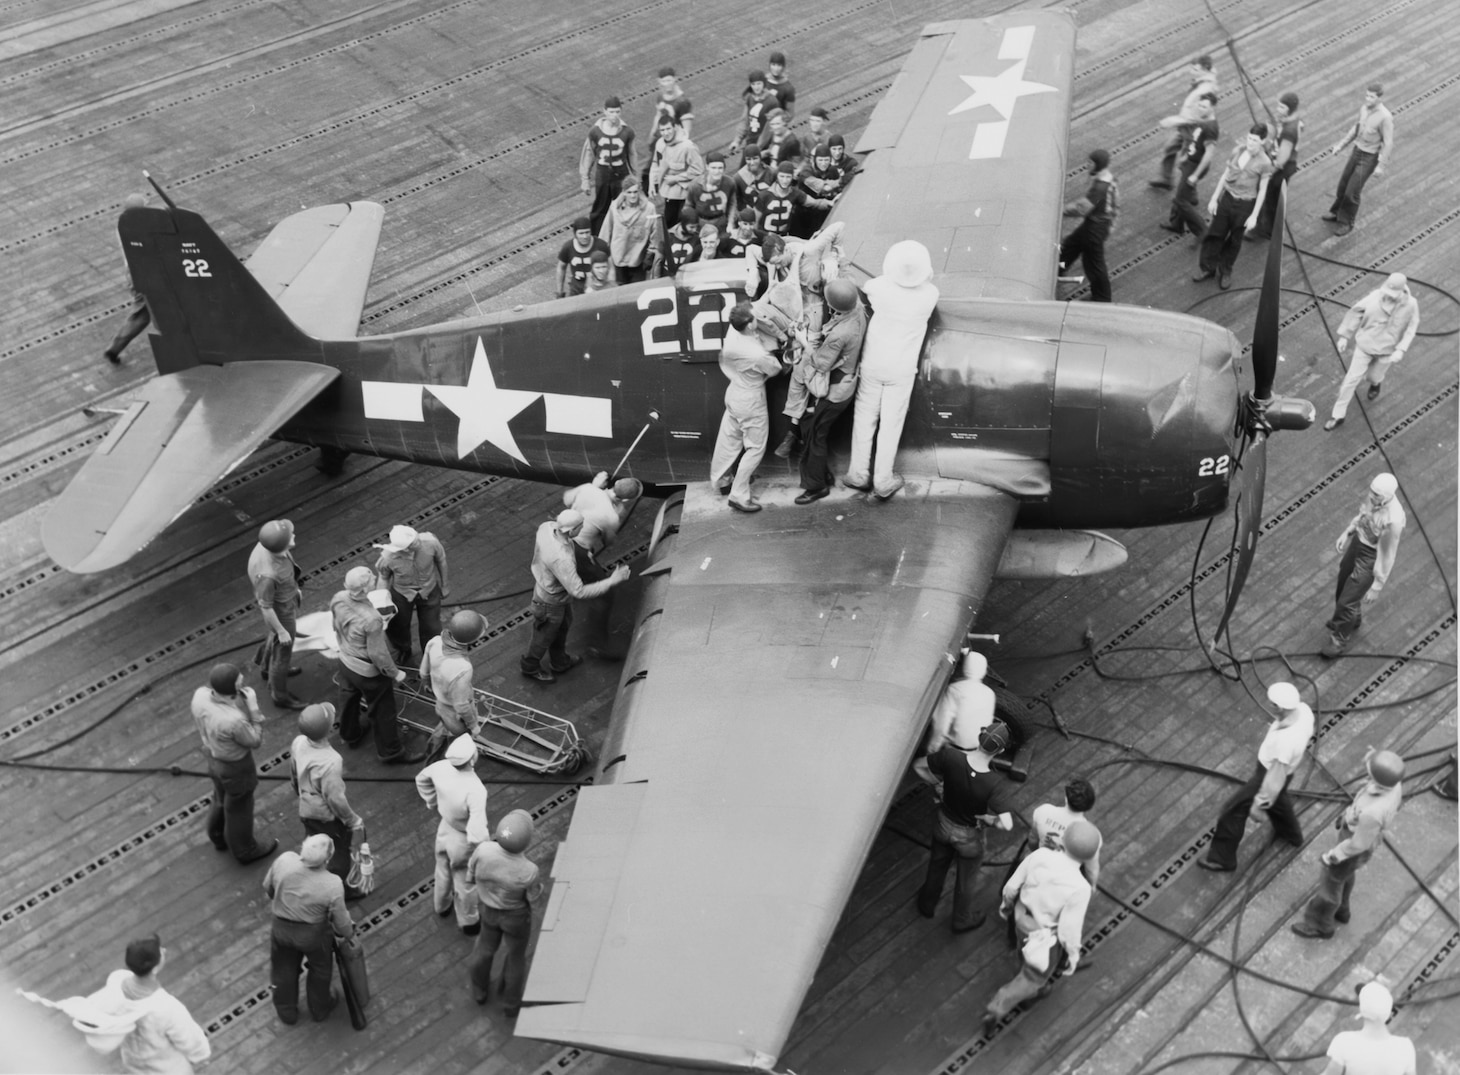 Battle of Leyte Gulf, October 1944. Removing a wounded pilot, Ensign A.A. Brauer, USNR, from his F6F after a strike on the Japanese fleet on 25 October 1944. Photographed aboard USS LEXINGTON (CV-16). The plane appears to have hit the crash barrier.